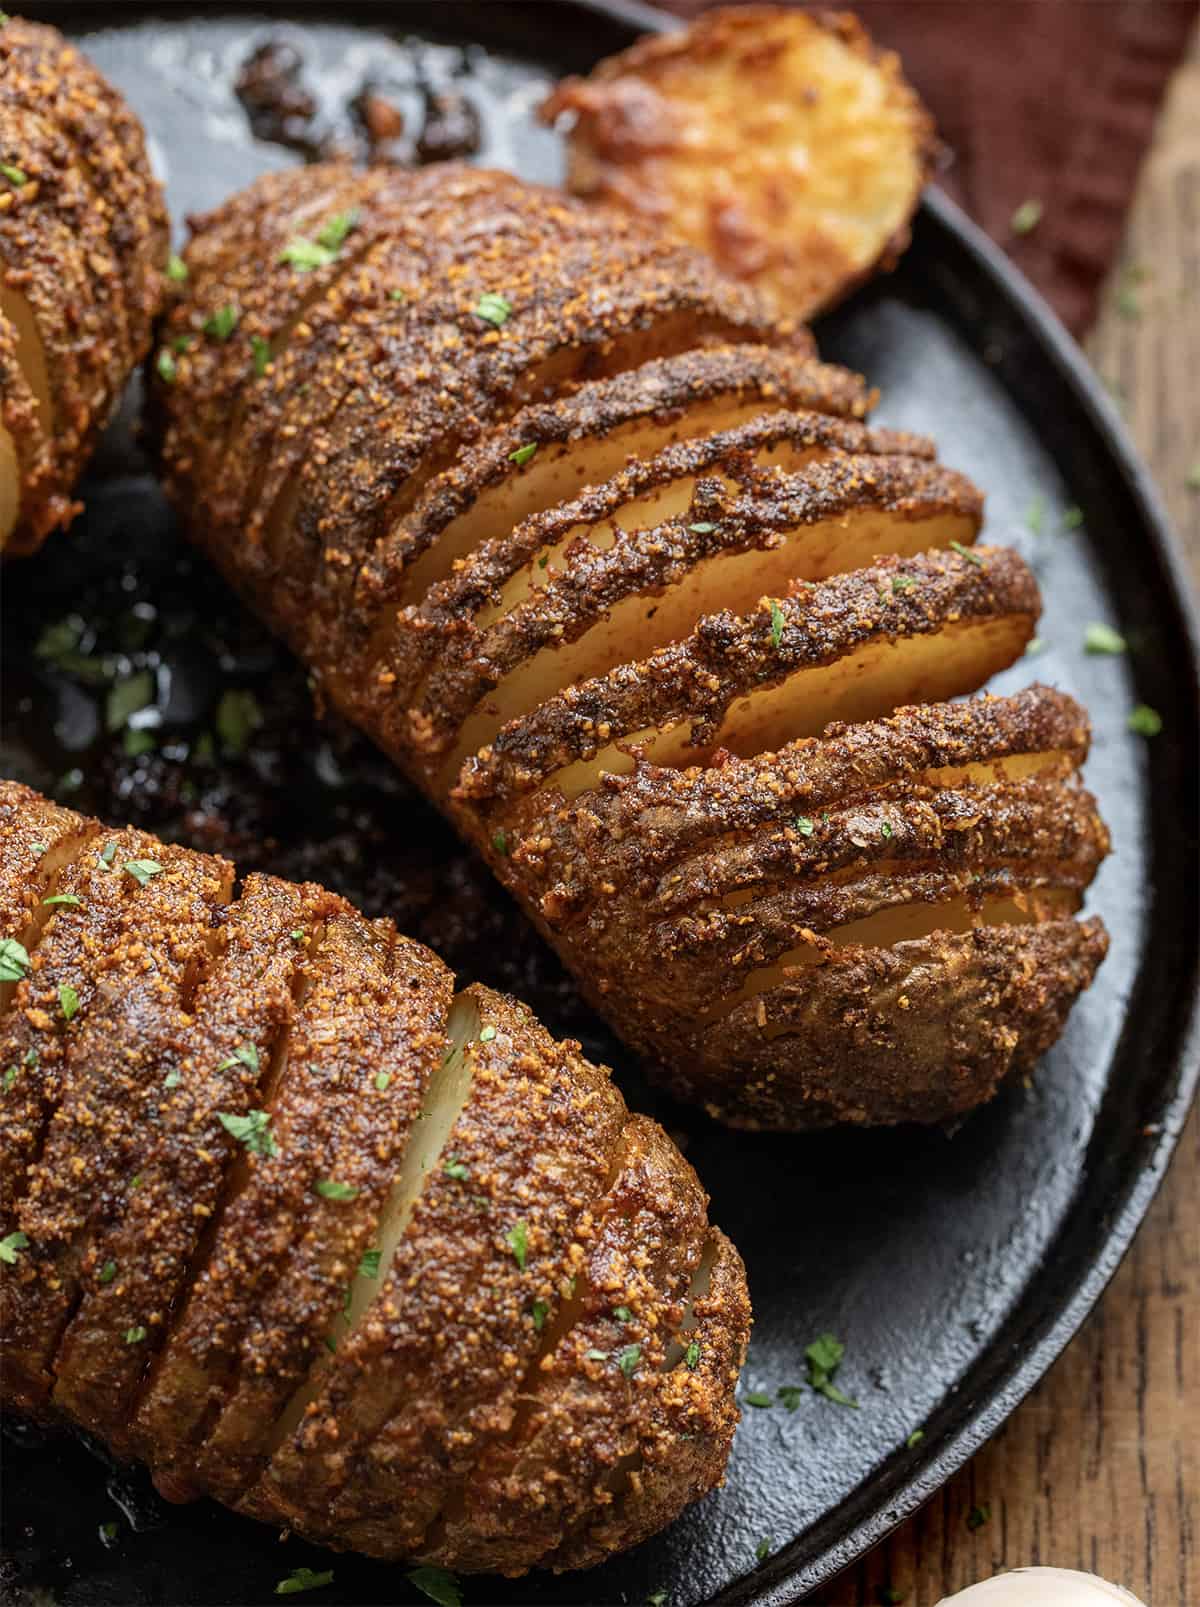 Crispy Garlic Parmesan Hasselback Potatoes on a Black Skillet and Showing Layers.